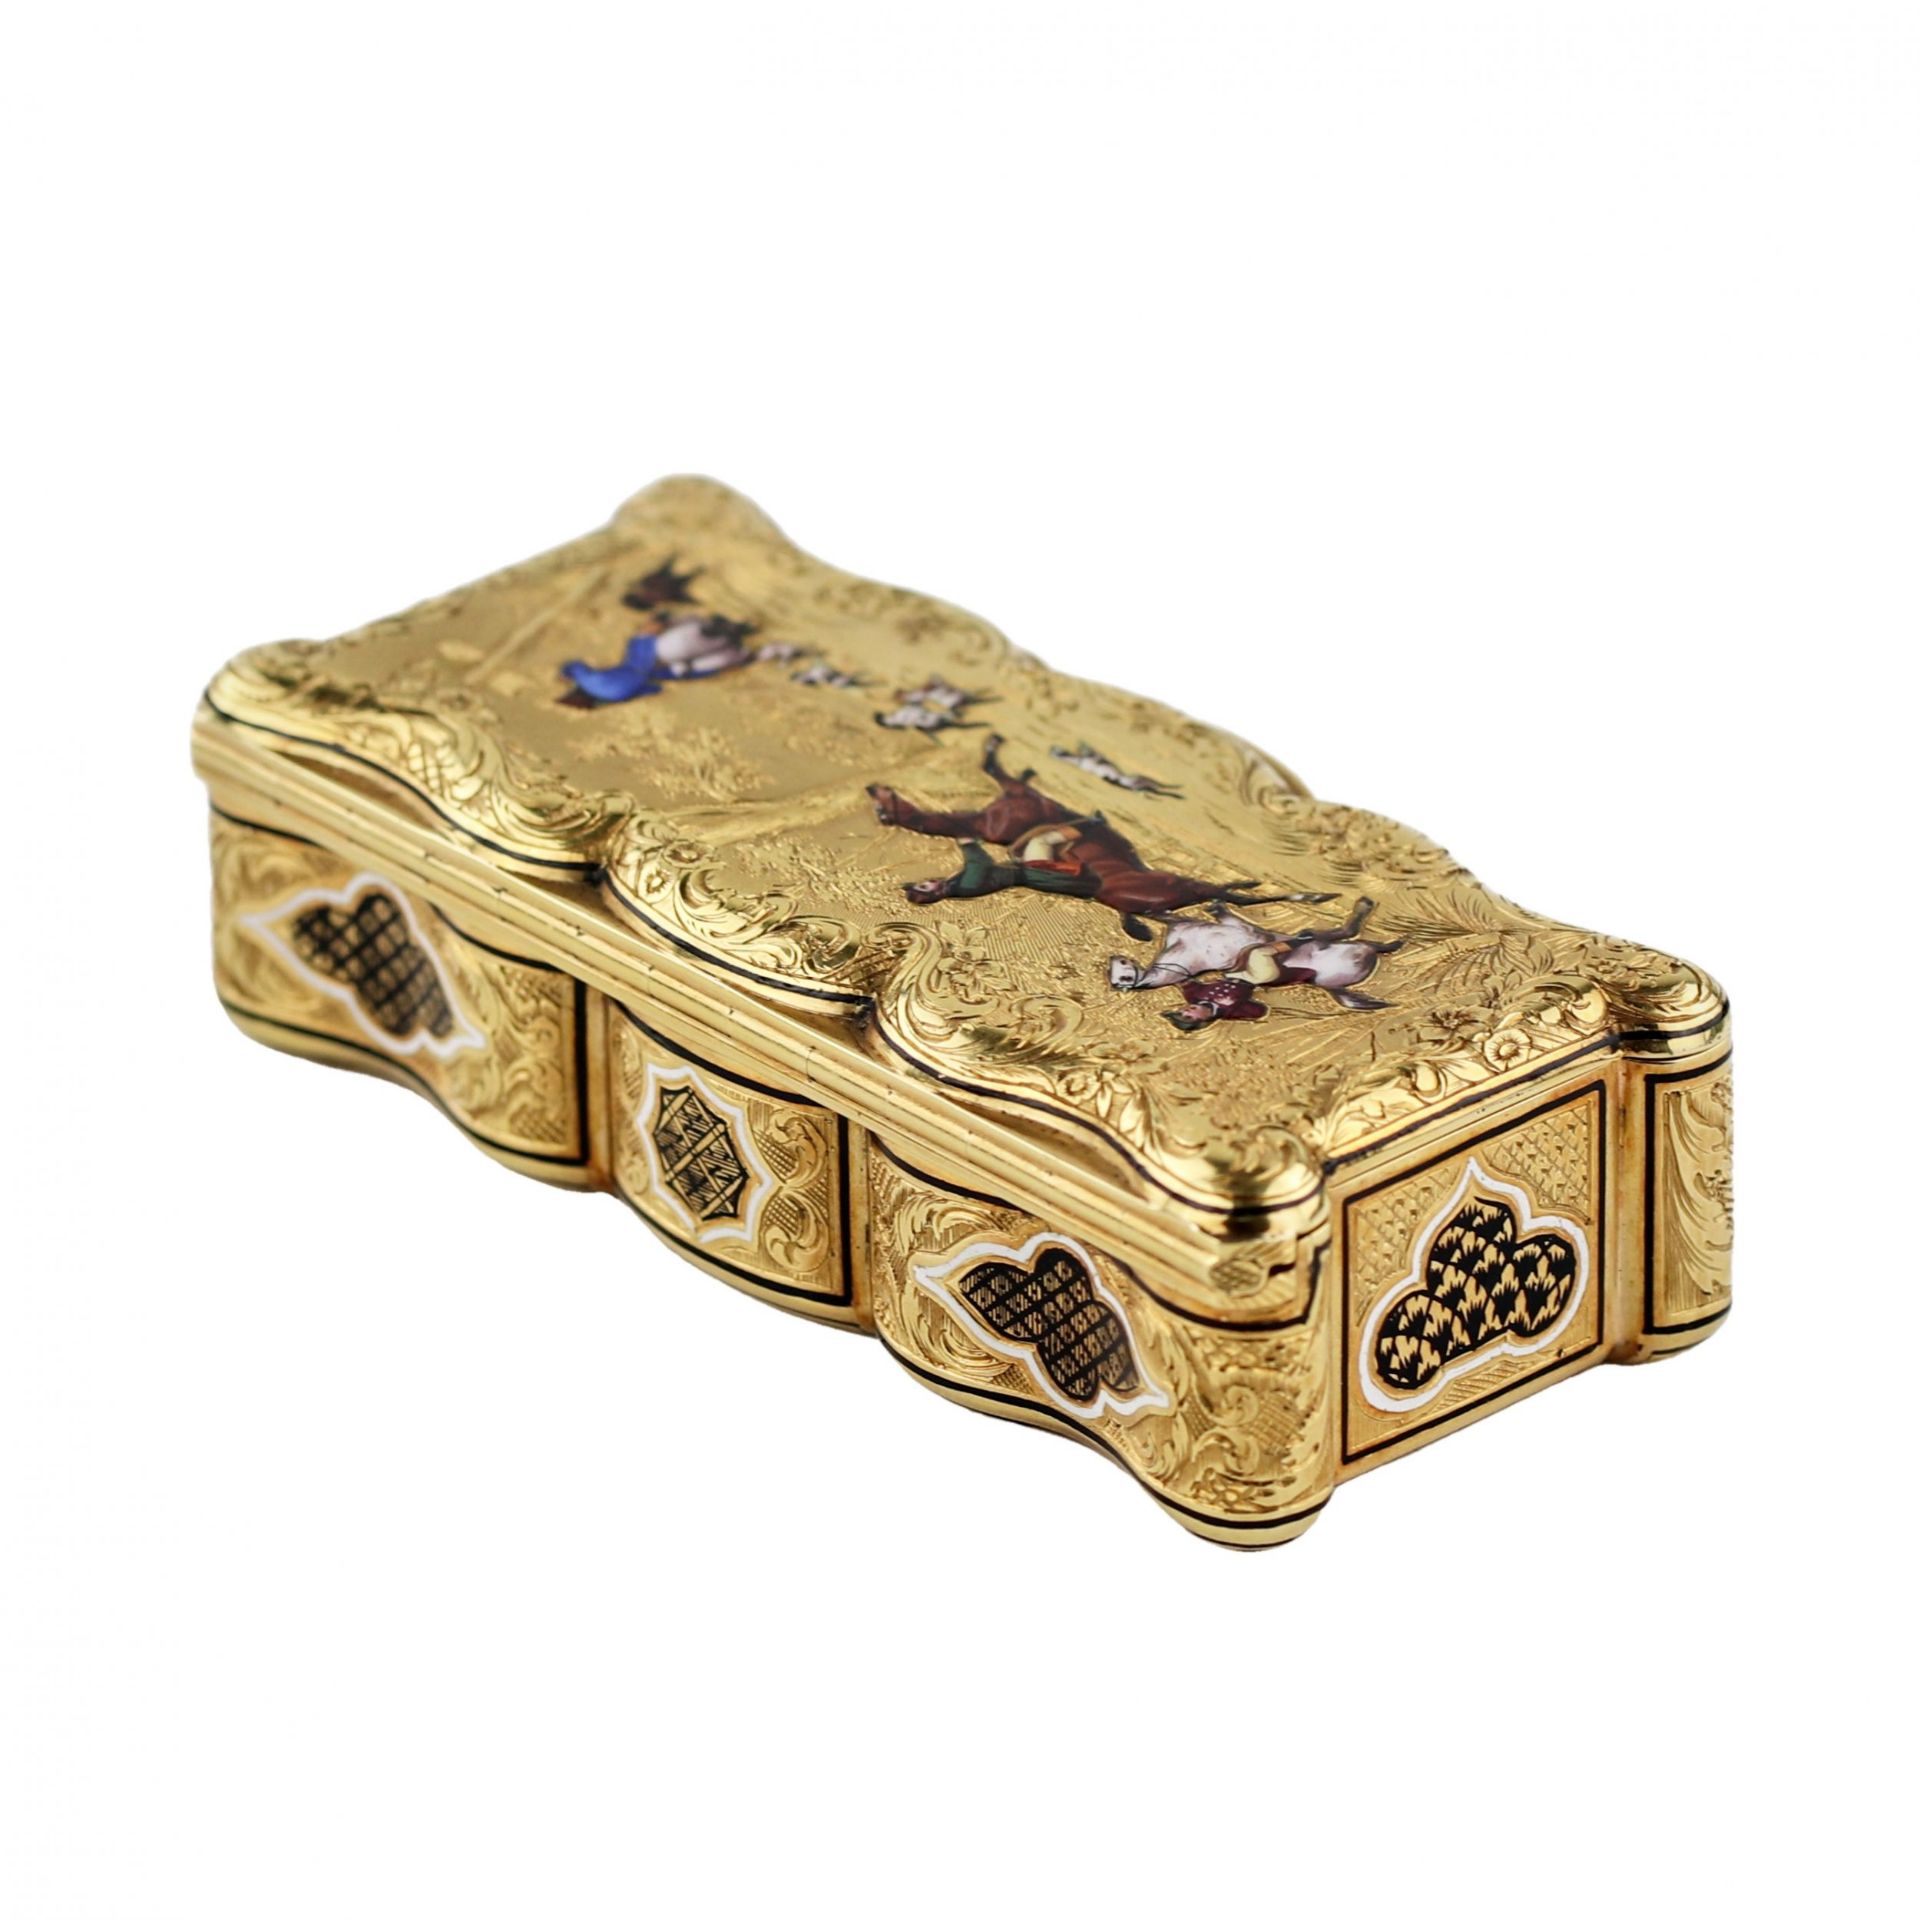 18K gold enameled snuffbox with scenes of equestrian hunting. French work of the 19th century. - Bild 2 aus 10